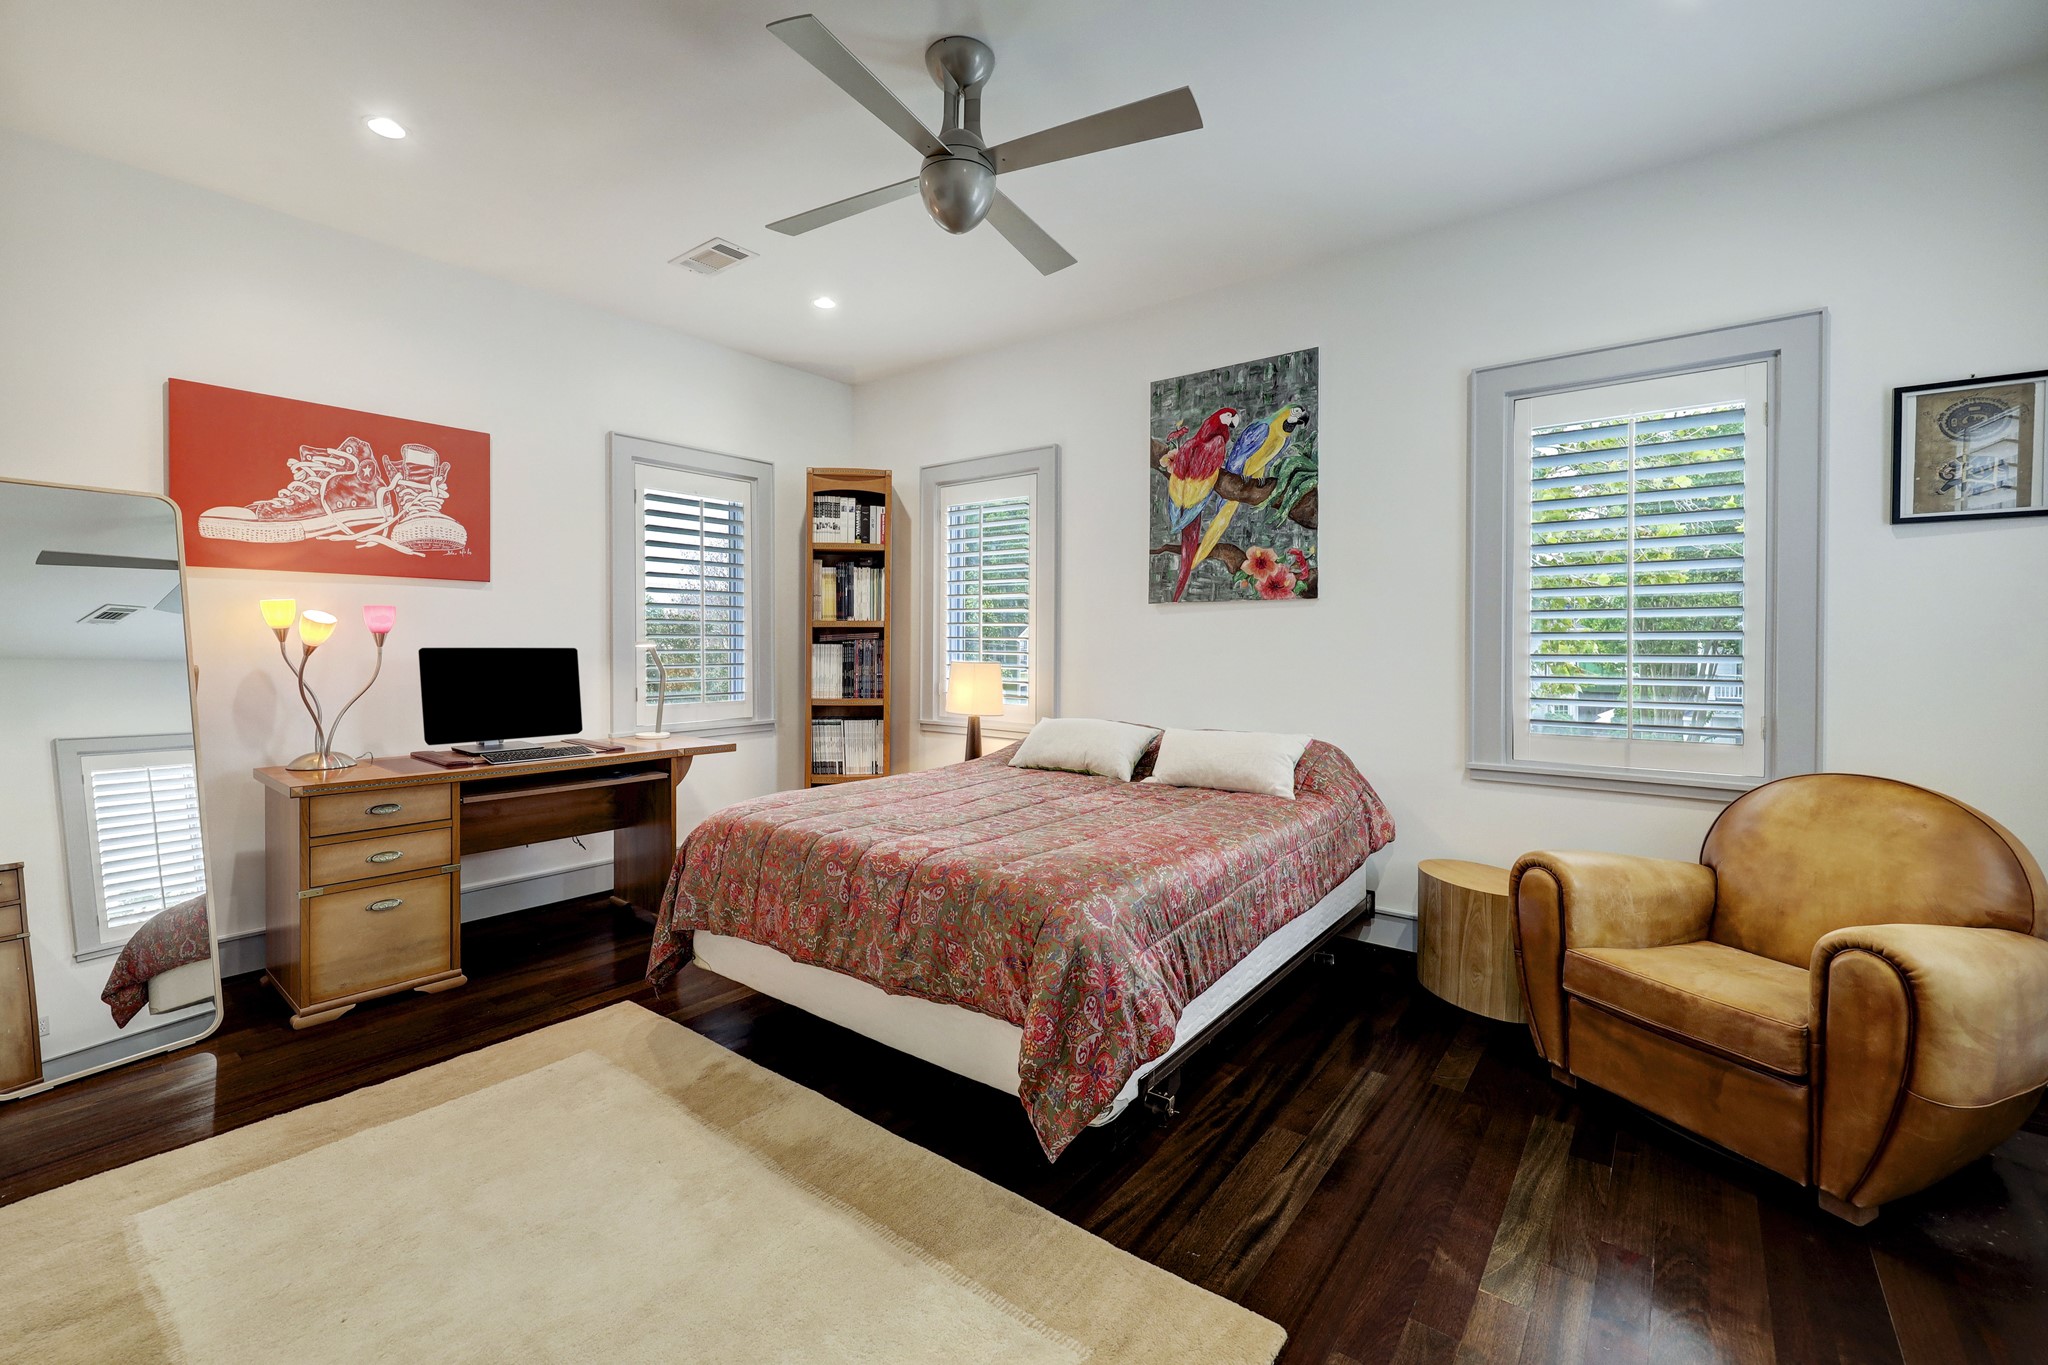 A comfortable bedroom with plantation shutters and handsome hardwood floors.


